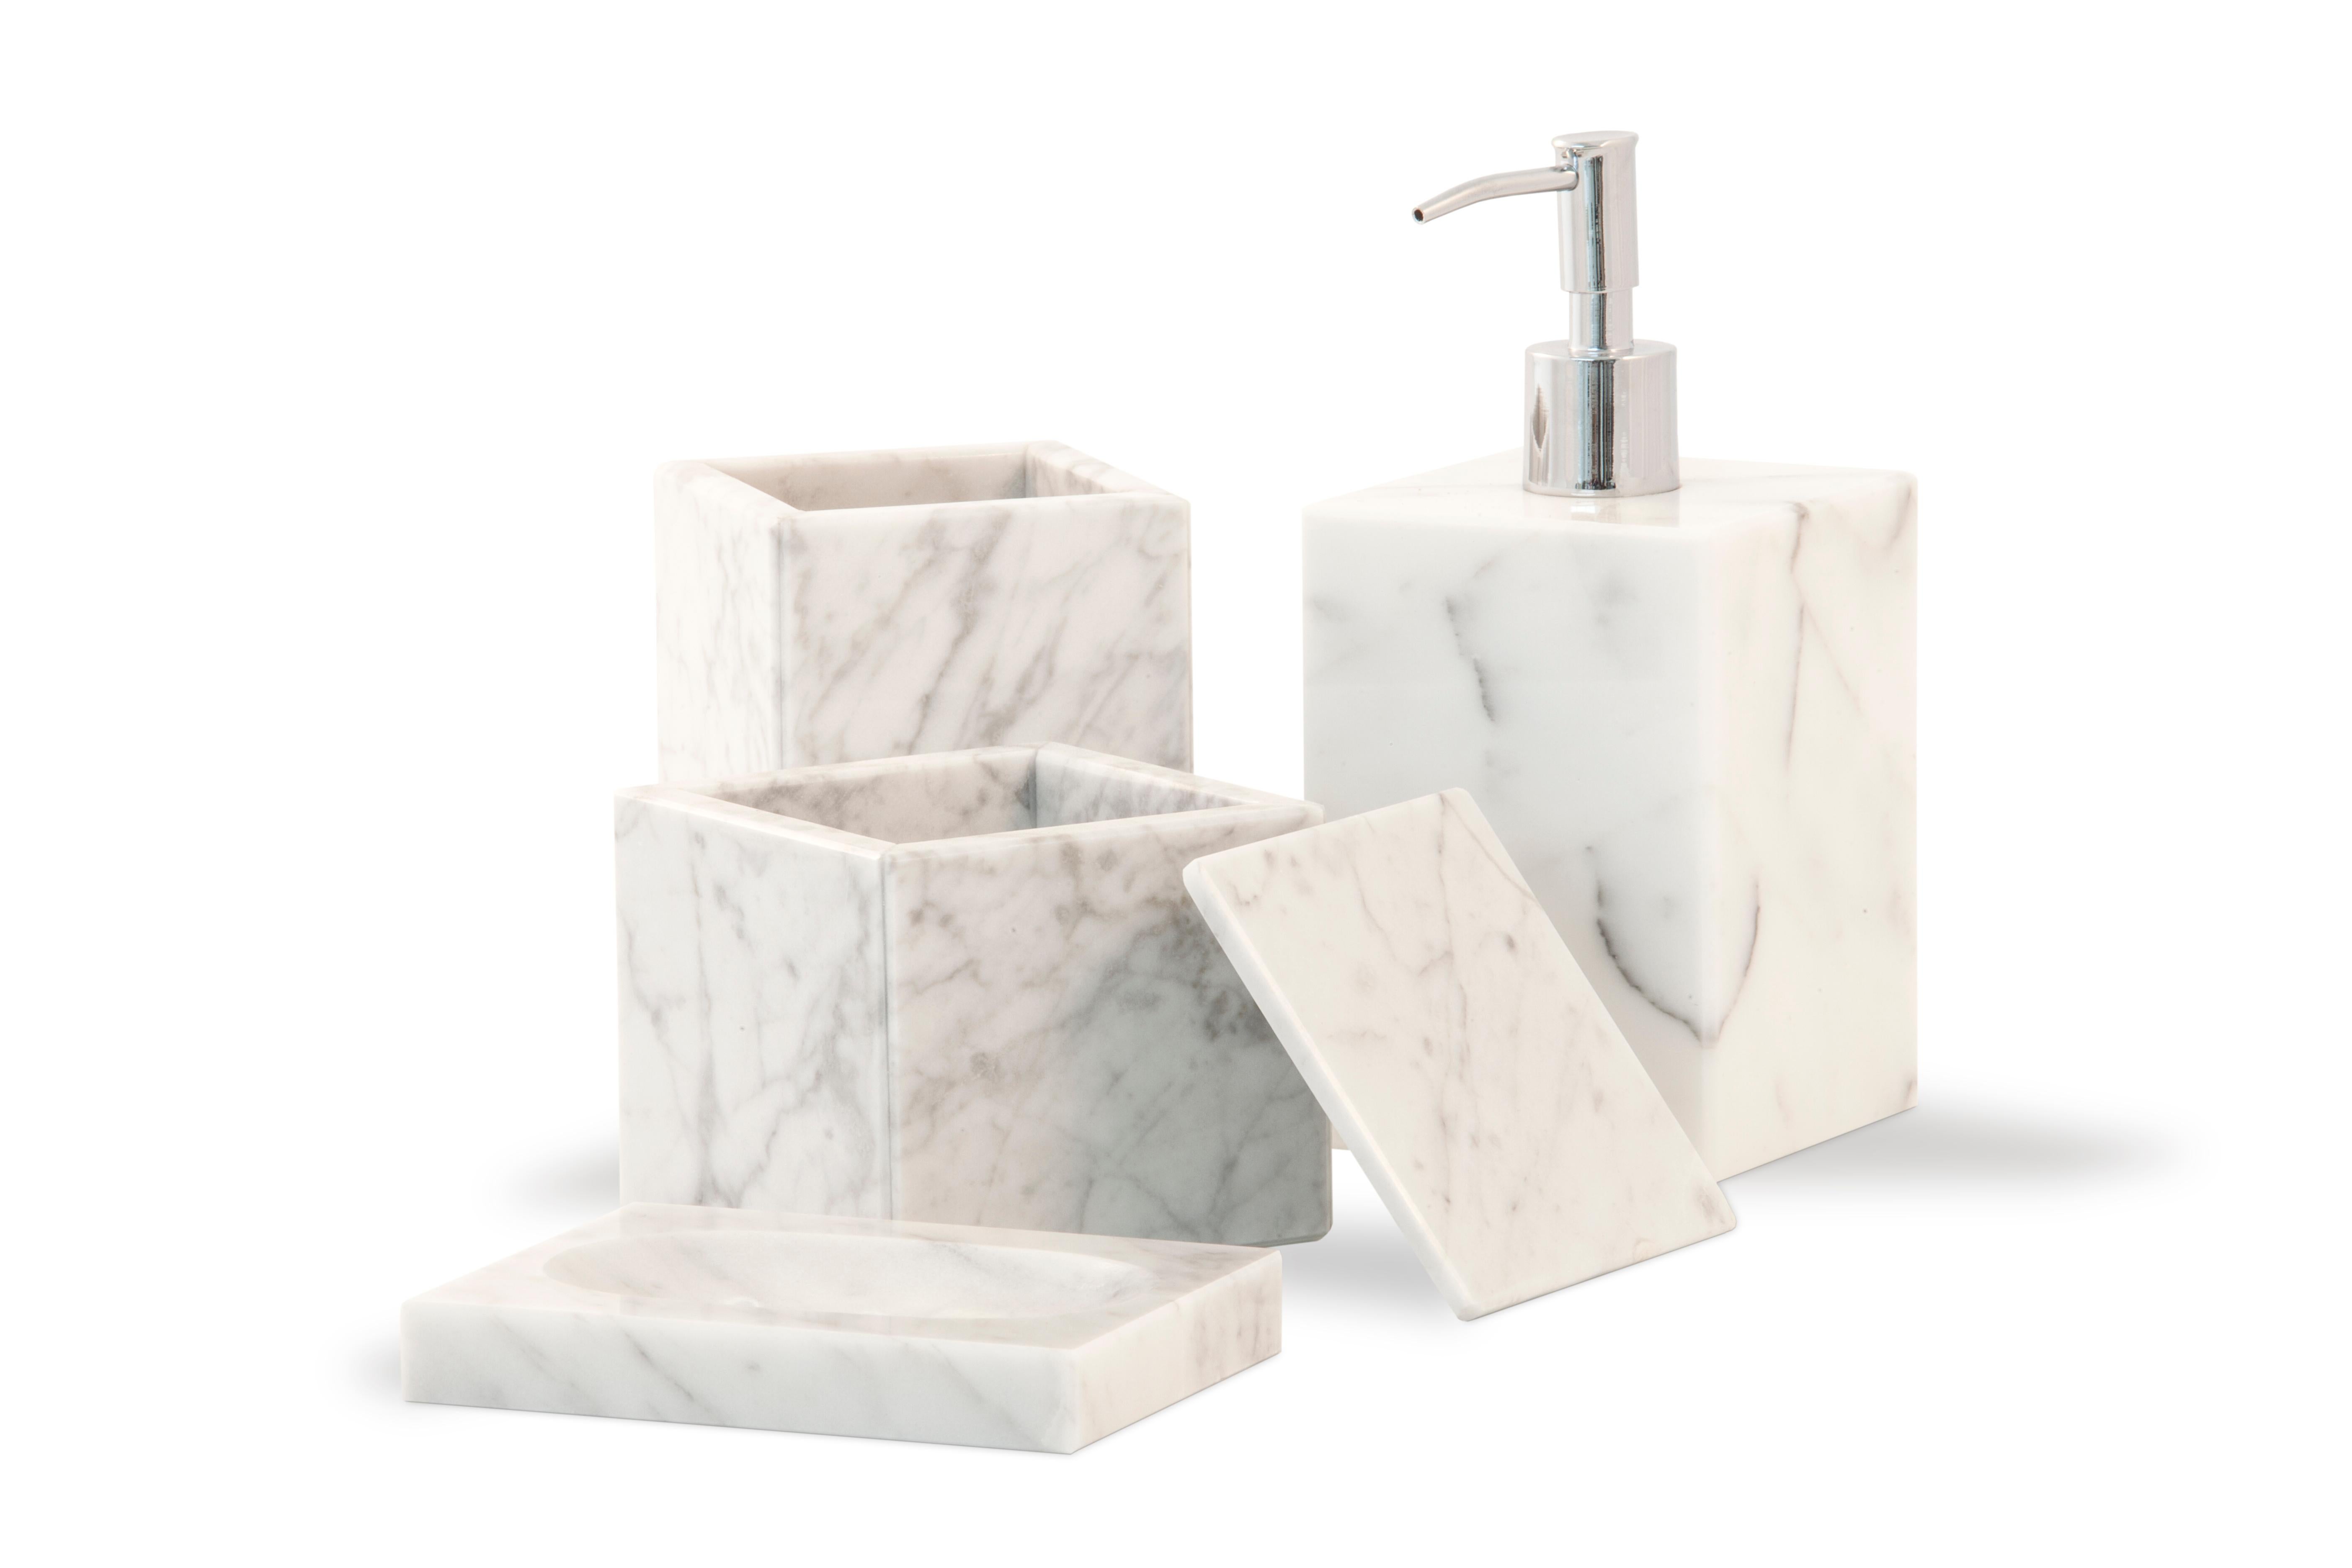 Squared soap dish in white Carrara marble with little holes for water.

Each piece is in a way unique (since each marble block is different in veins and shades) and handcrafted in Italy. Slight variations in shape, color and size are to be